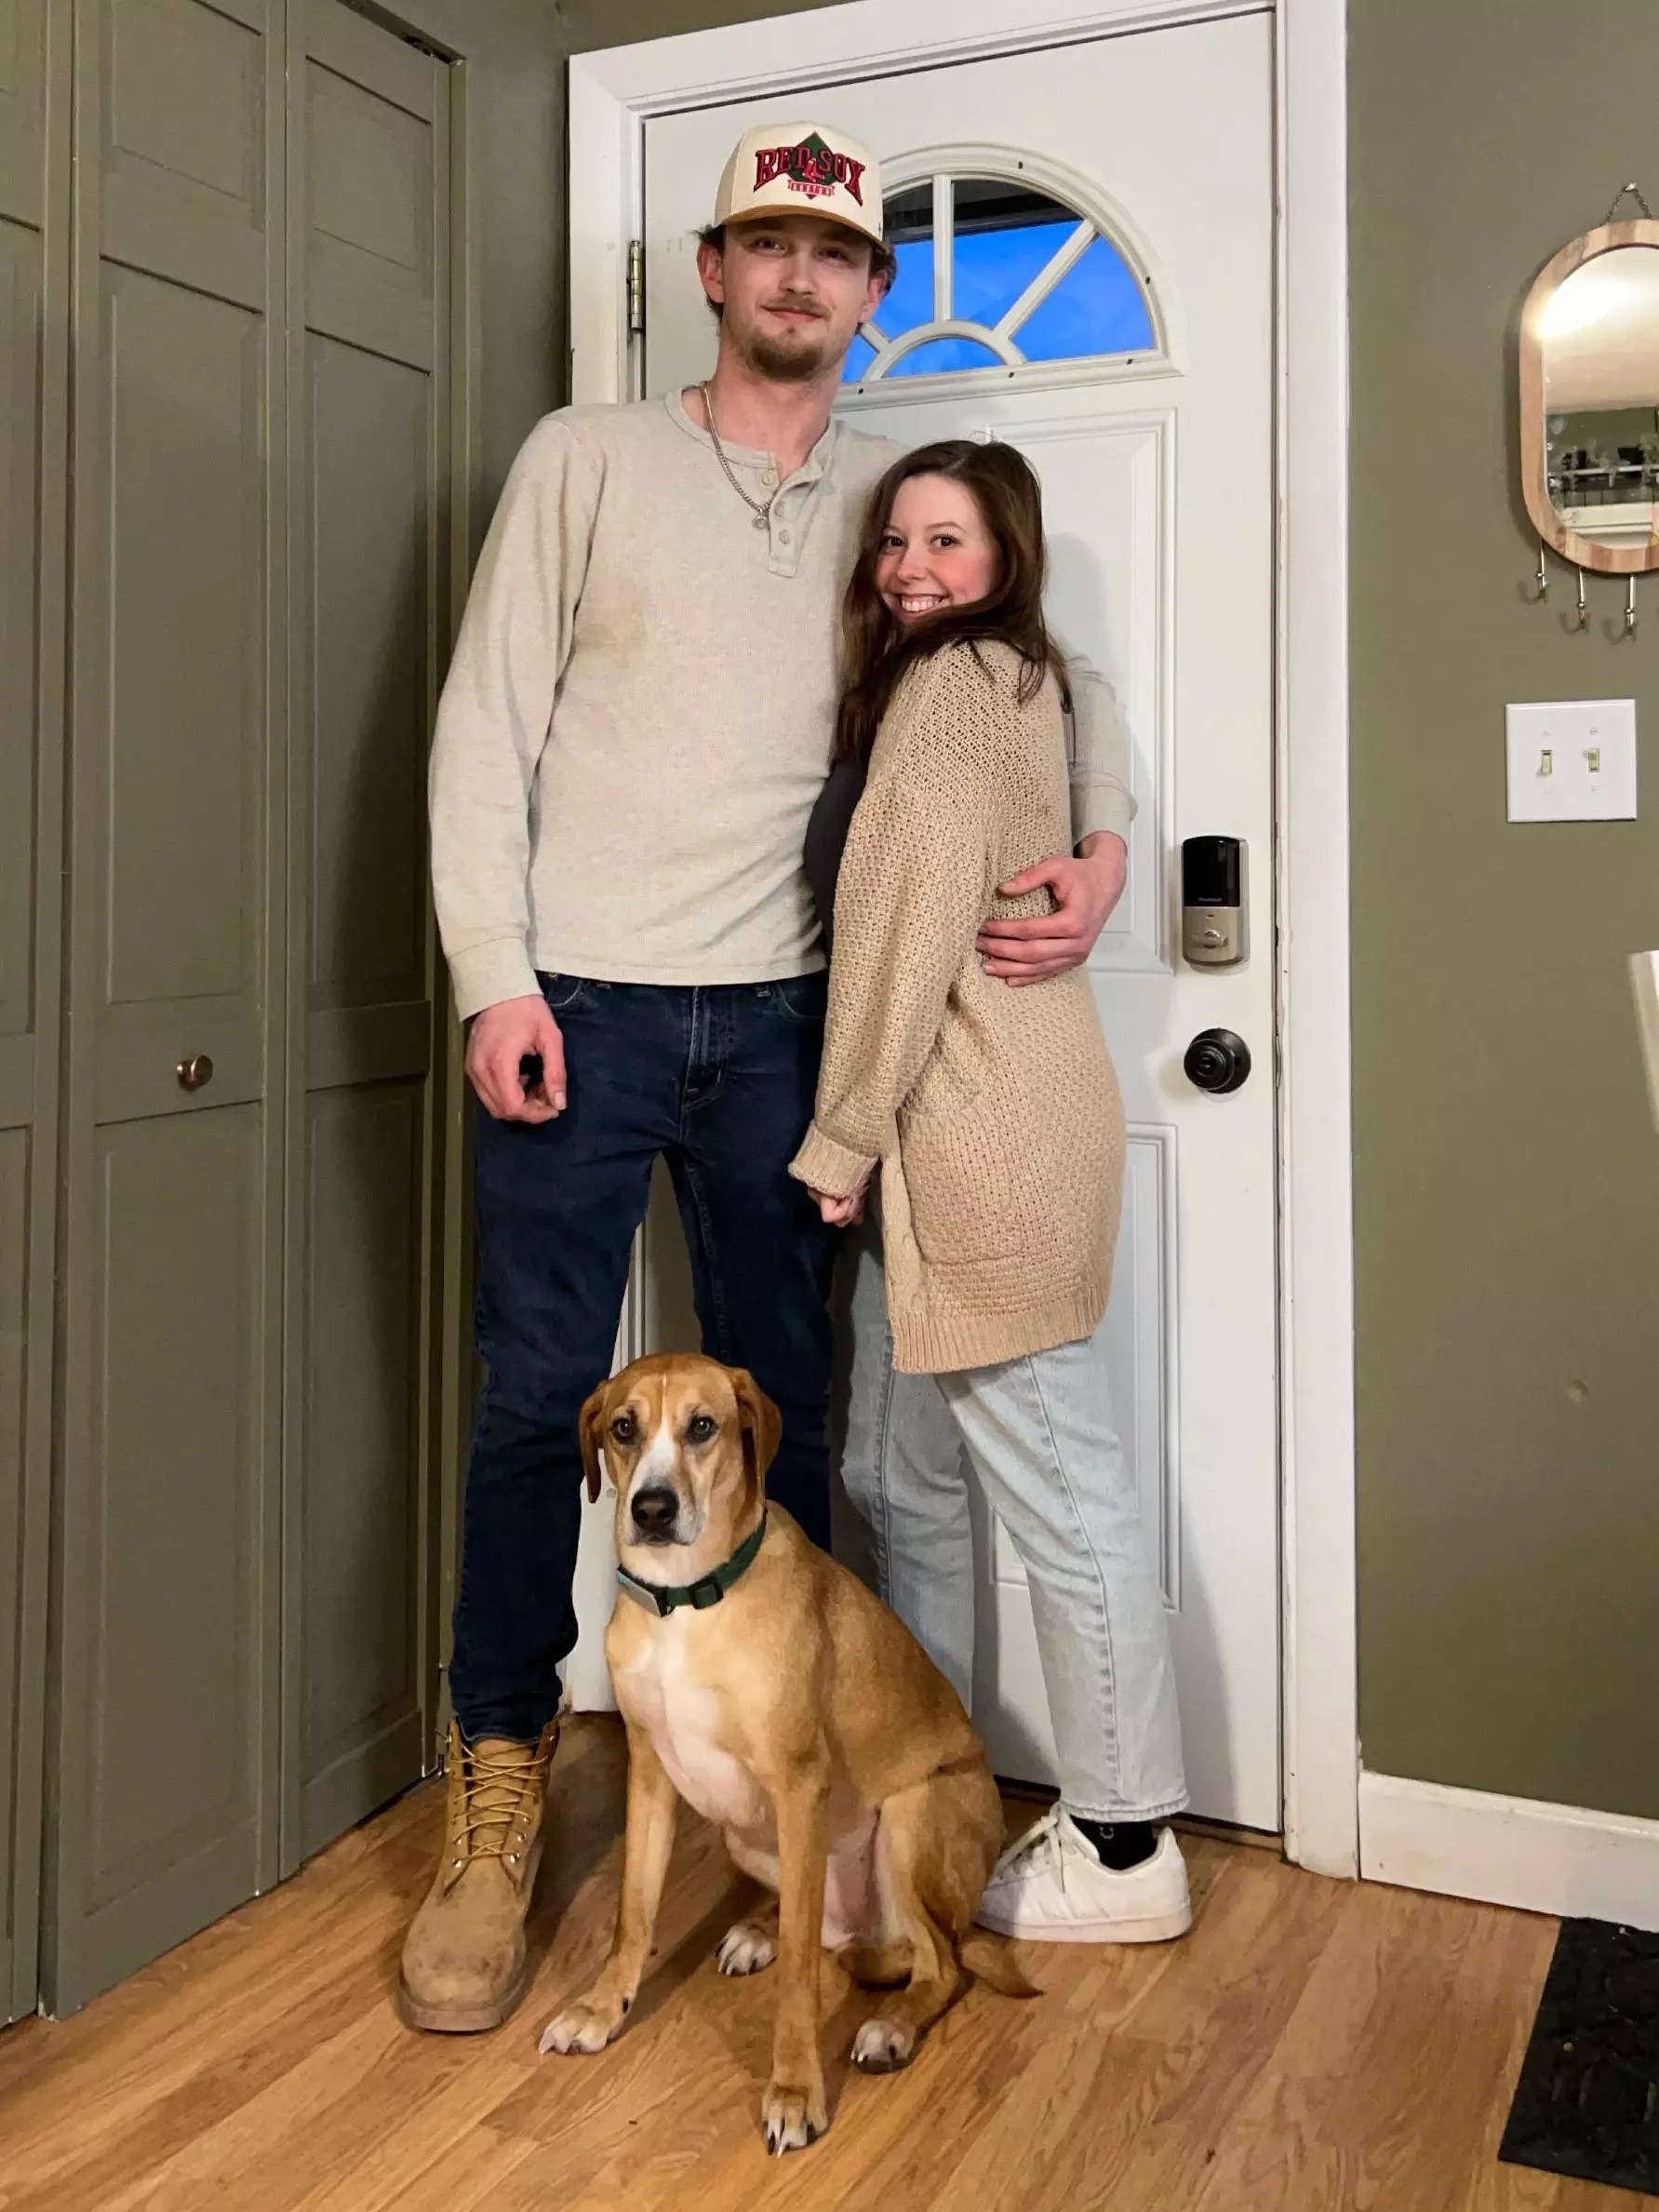 Grace Lucchese, Mickey Ricard, and their dog at home.